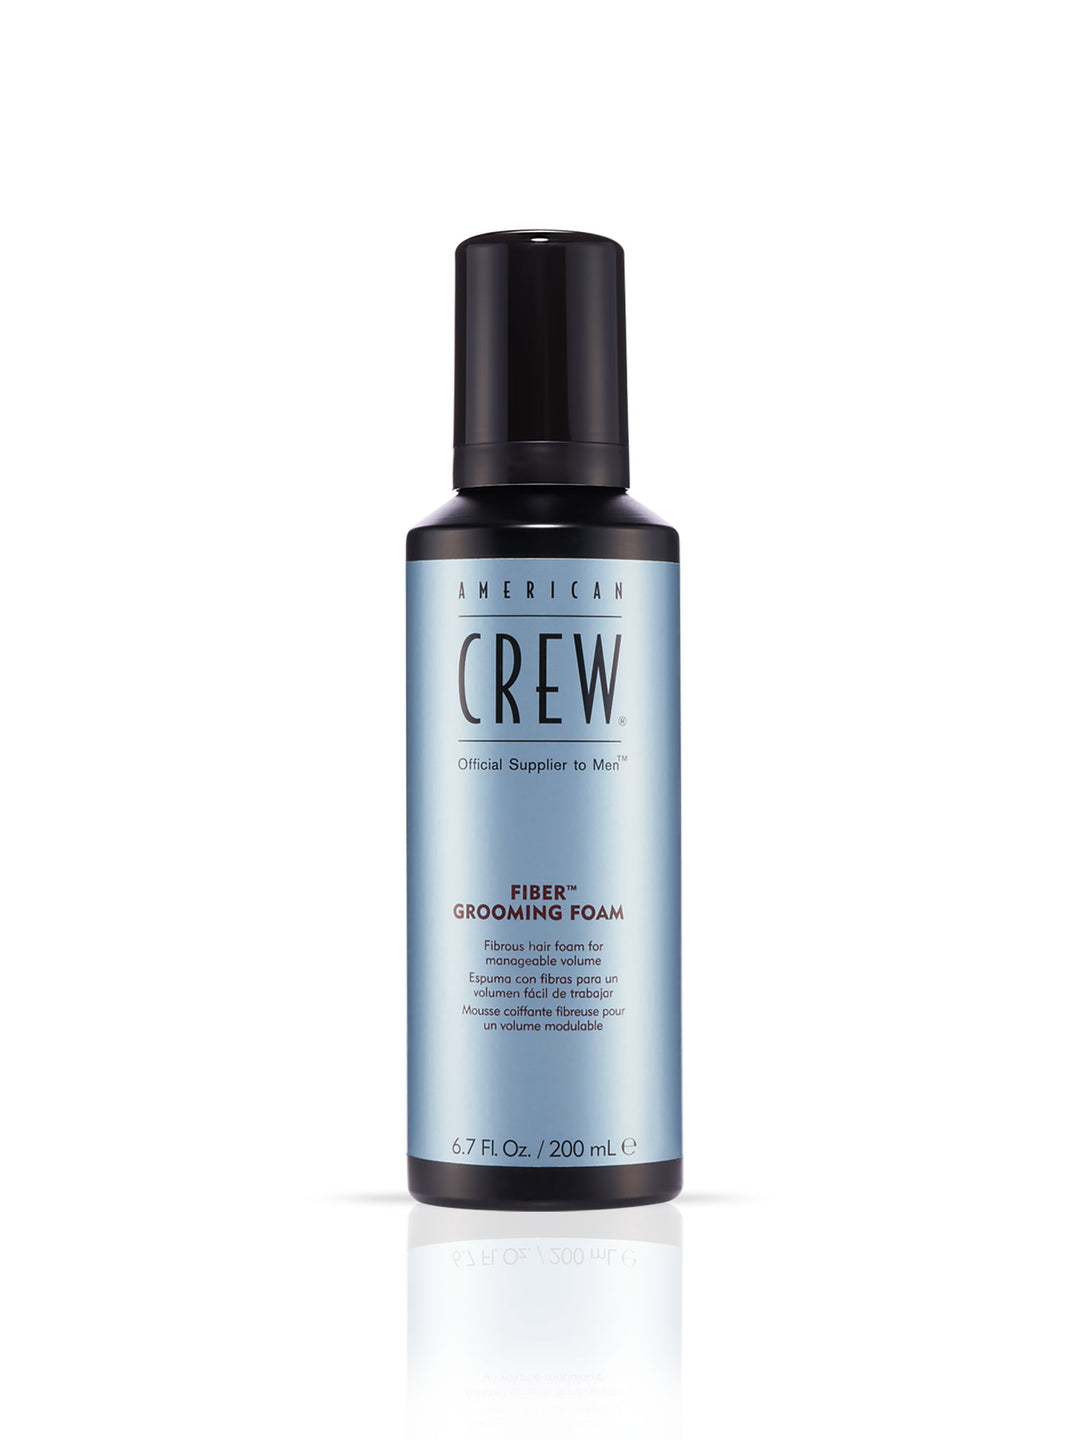 Hair Pomade, Cream, and Gel, Hair Styling Products - American Crew